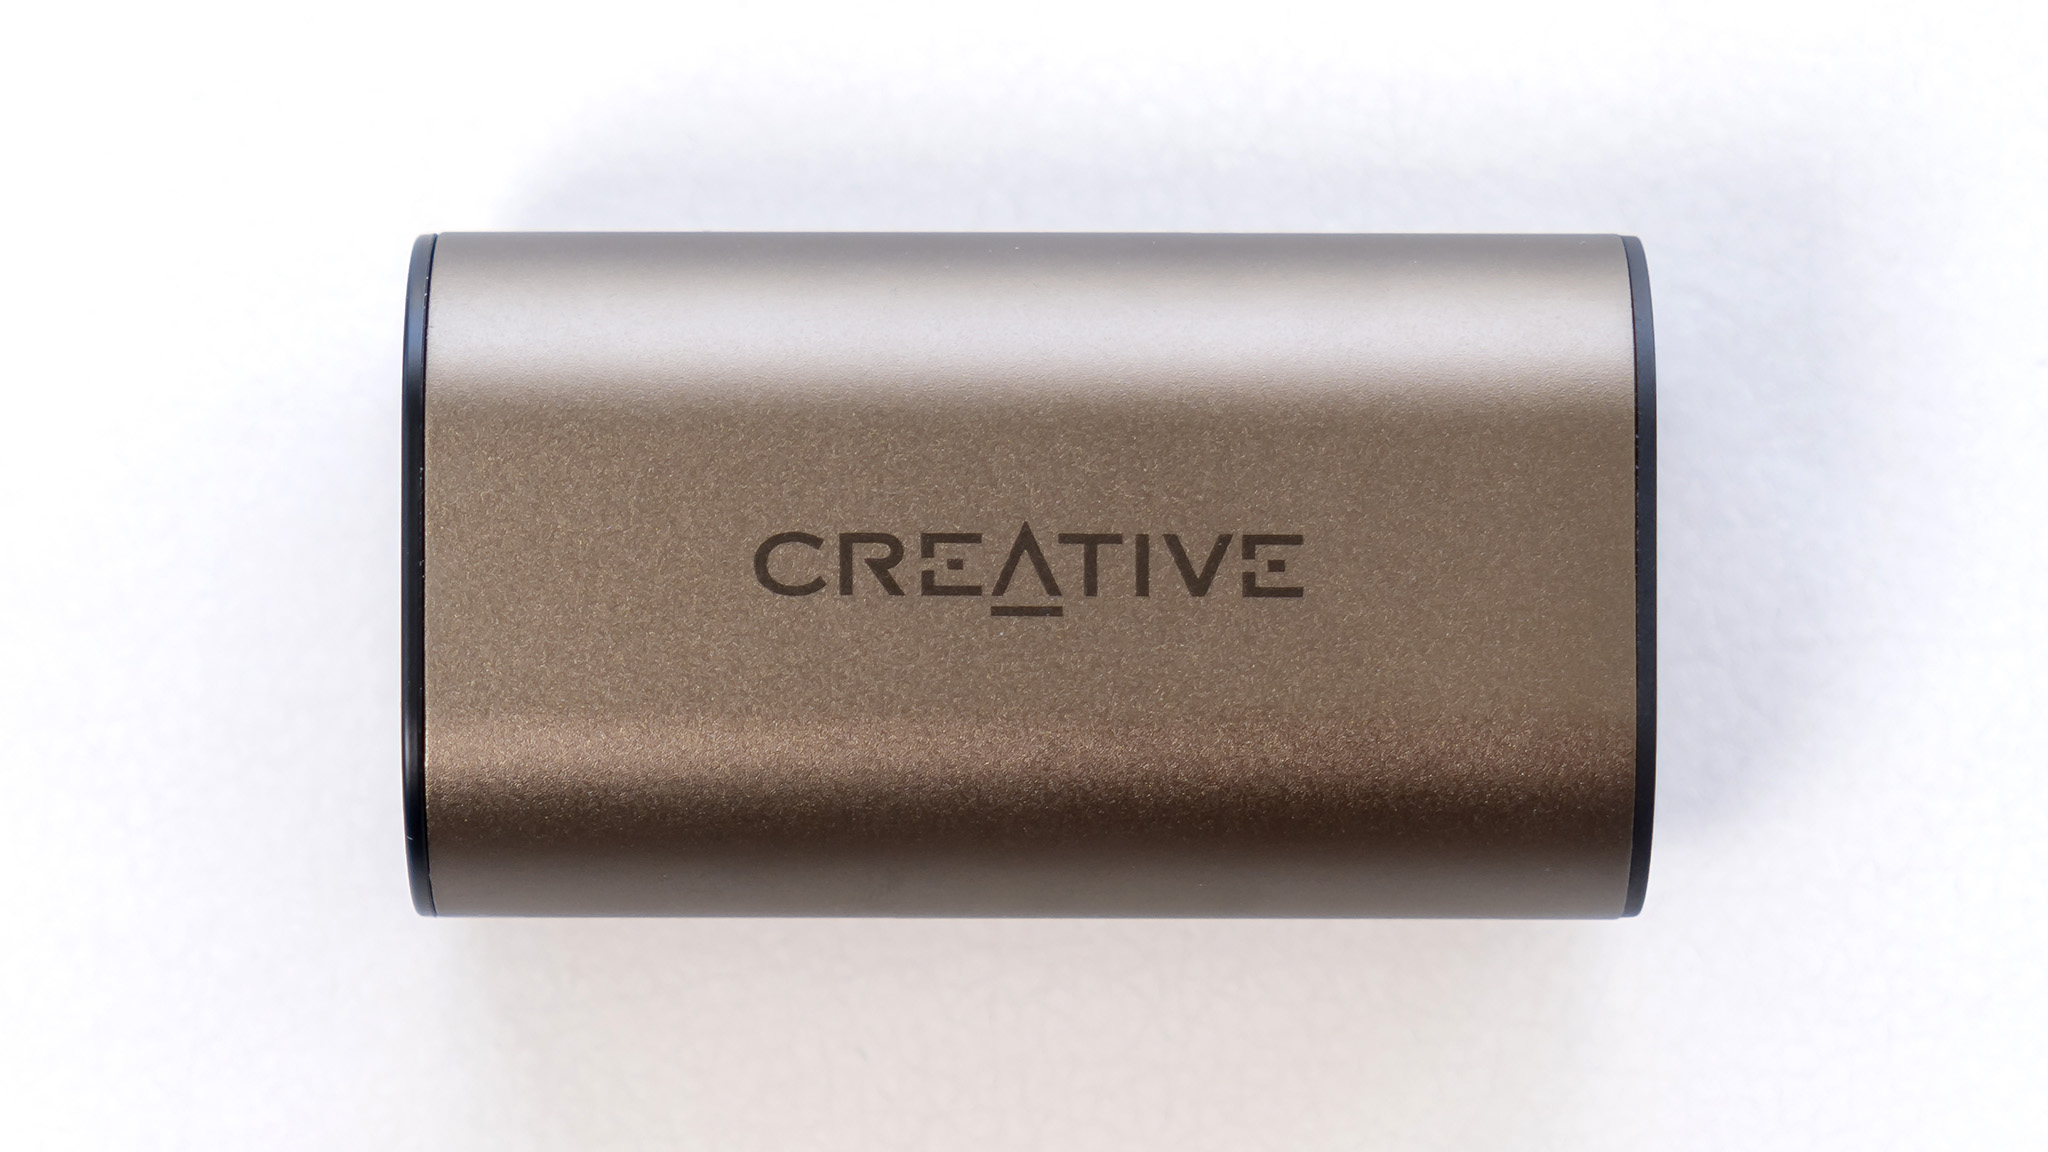 Creative Outlier Pro closed case.